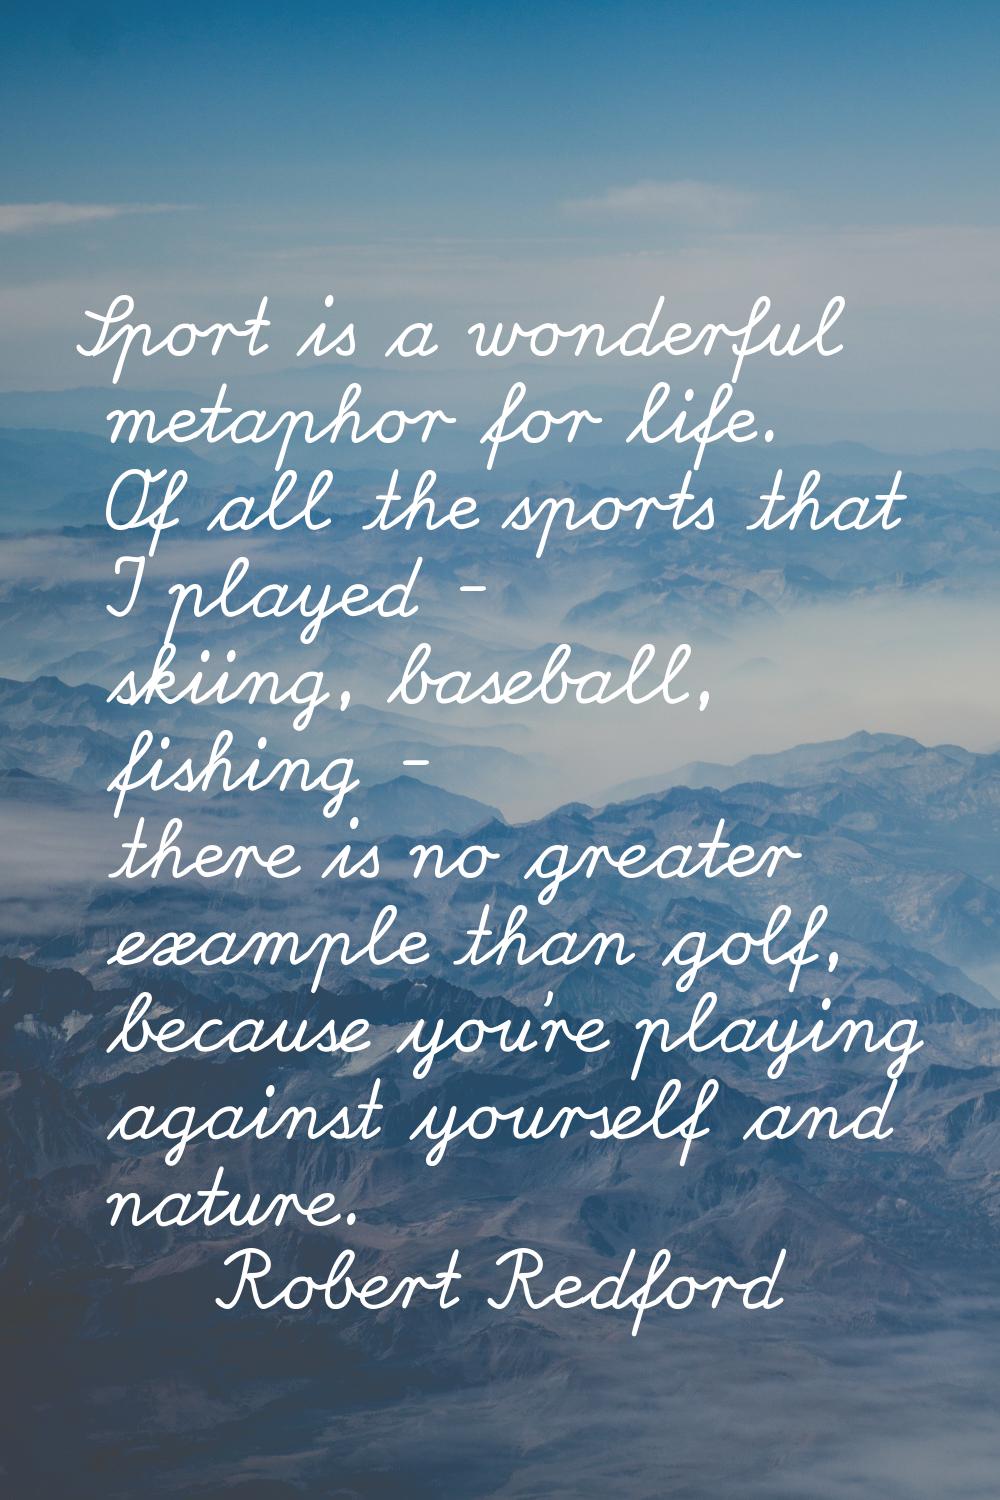 Sport is a wonderful metaphor for life. Of all the sports that I played - skiing, baseball, fishing